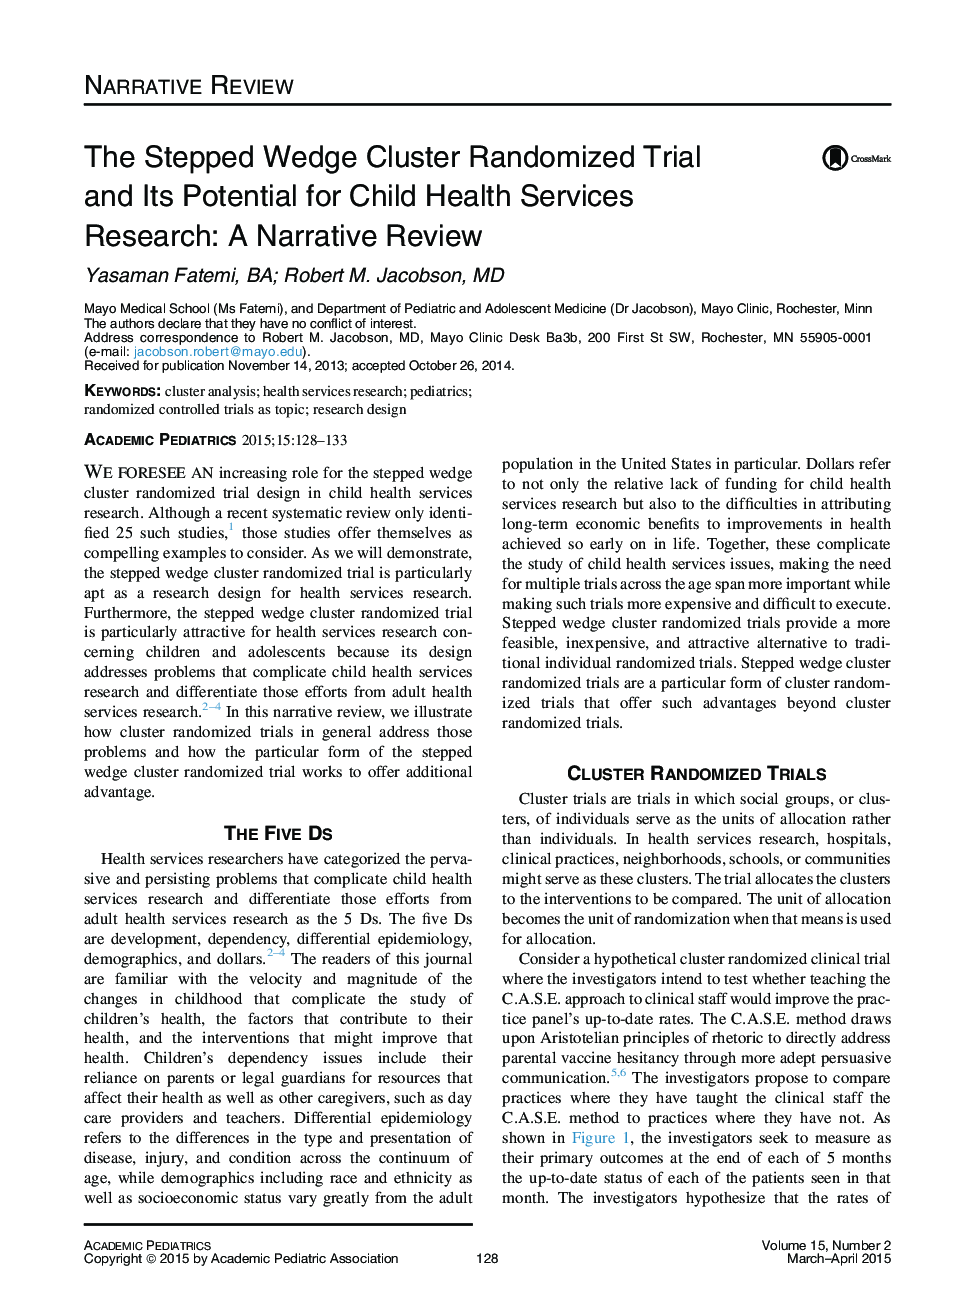 The Stepped Wedge Cluster Randomized Trial and Its Potential for Child Health Services Research: A Narrative Review